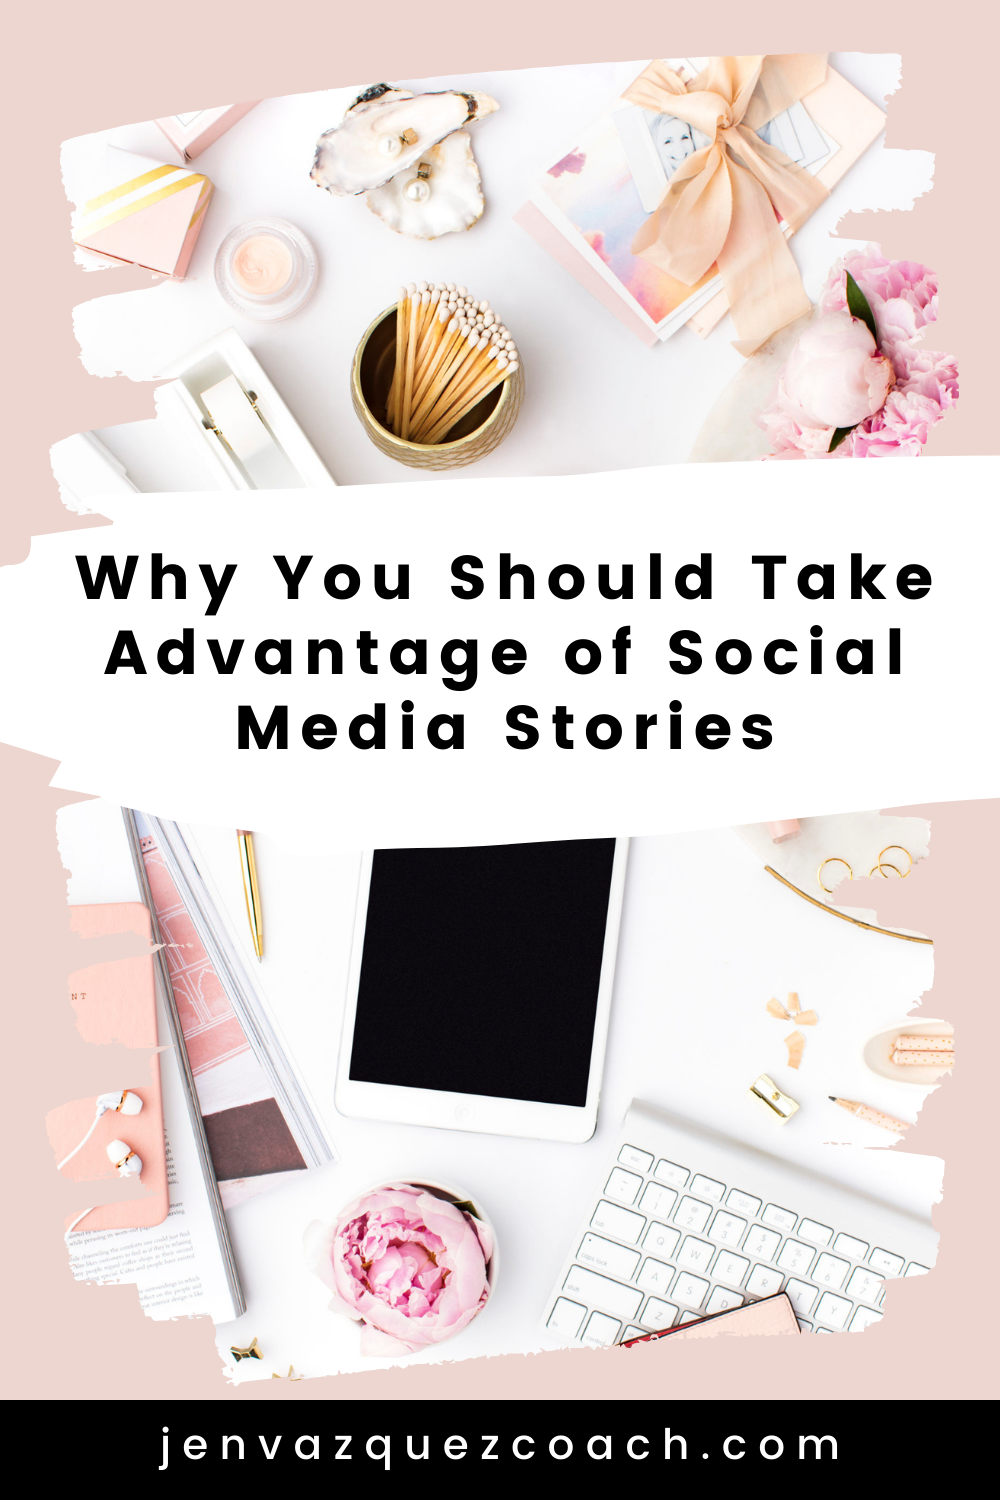 3 most important reasons to take advantage of social media stories for your business: 